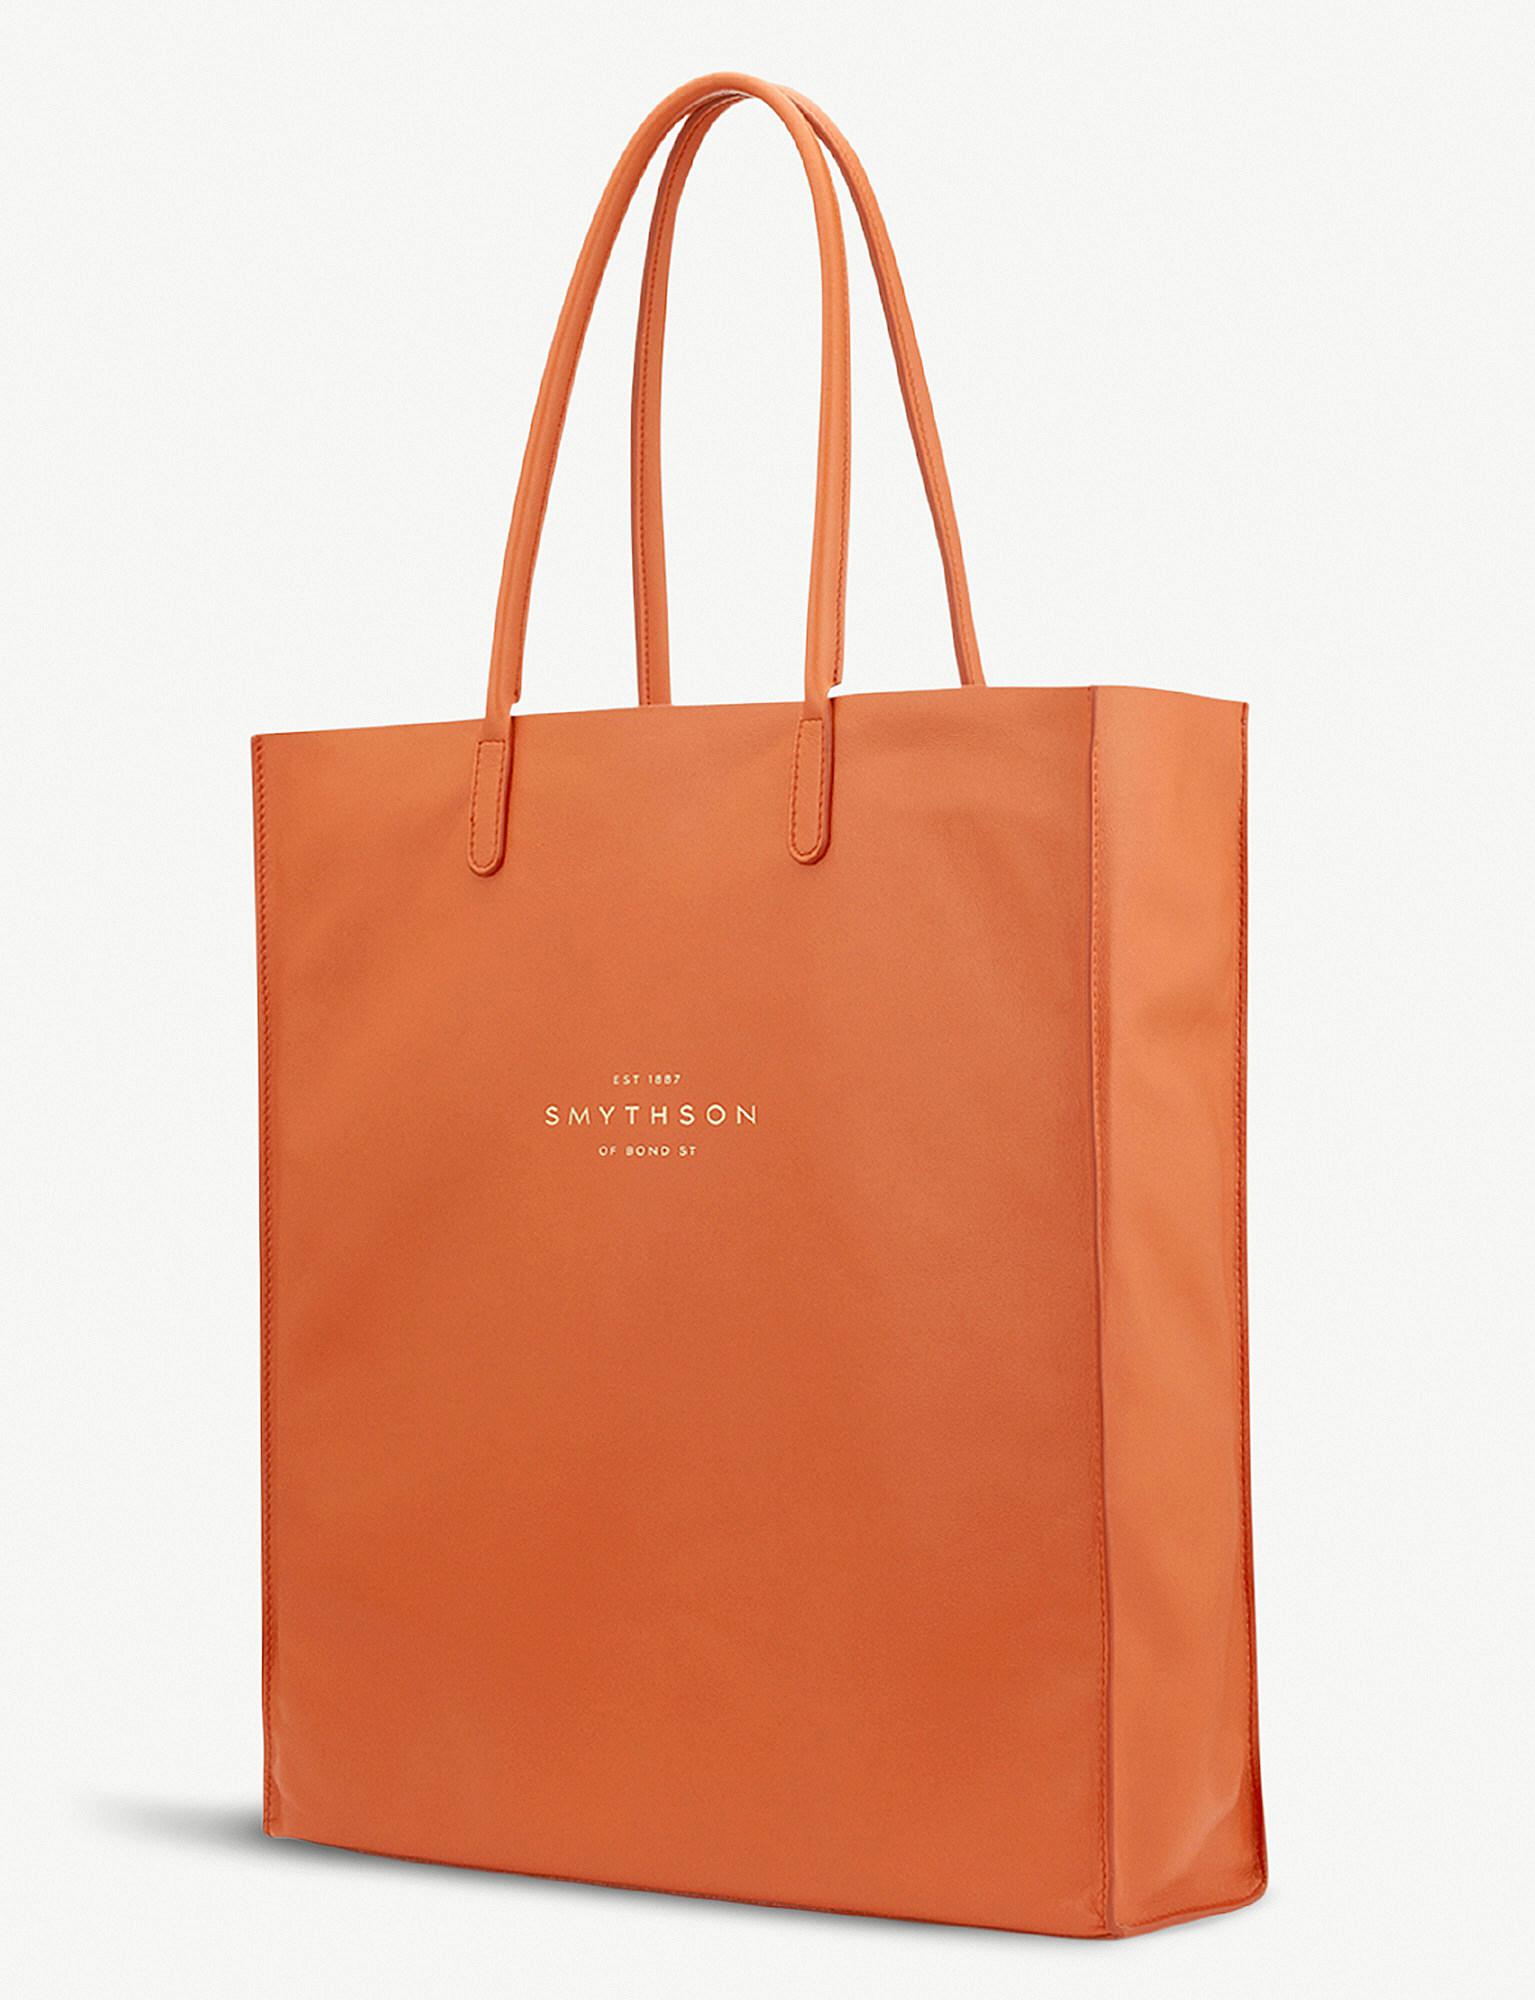 Smythson Kingly Leather Tote in Orange | Lyst